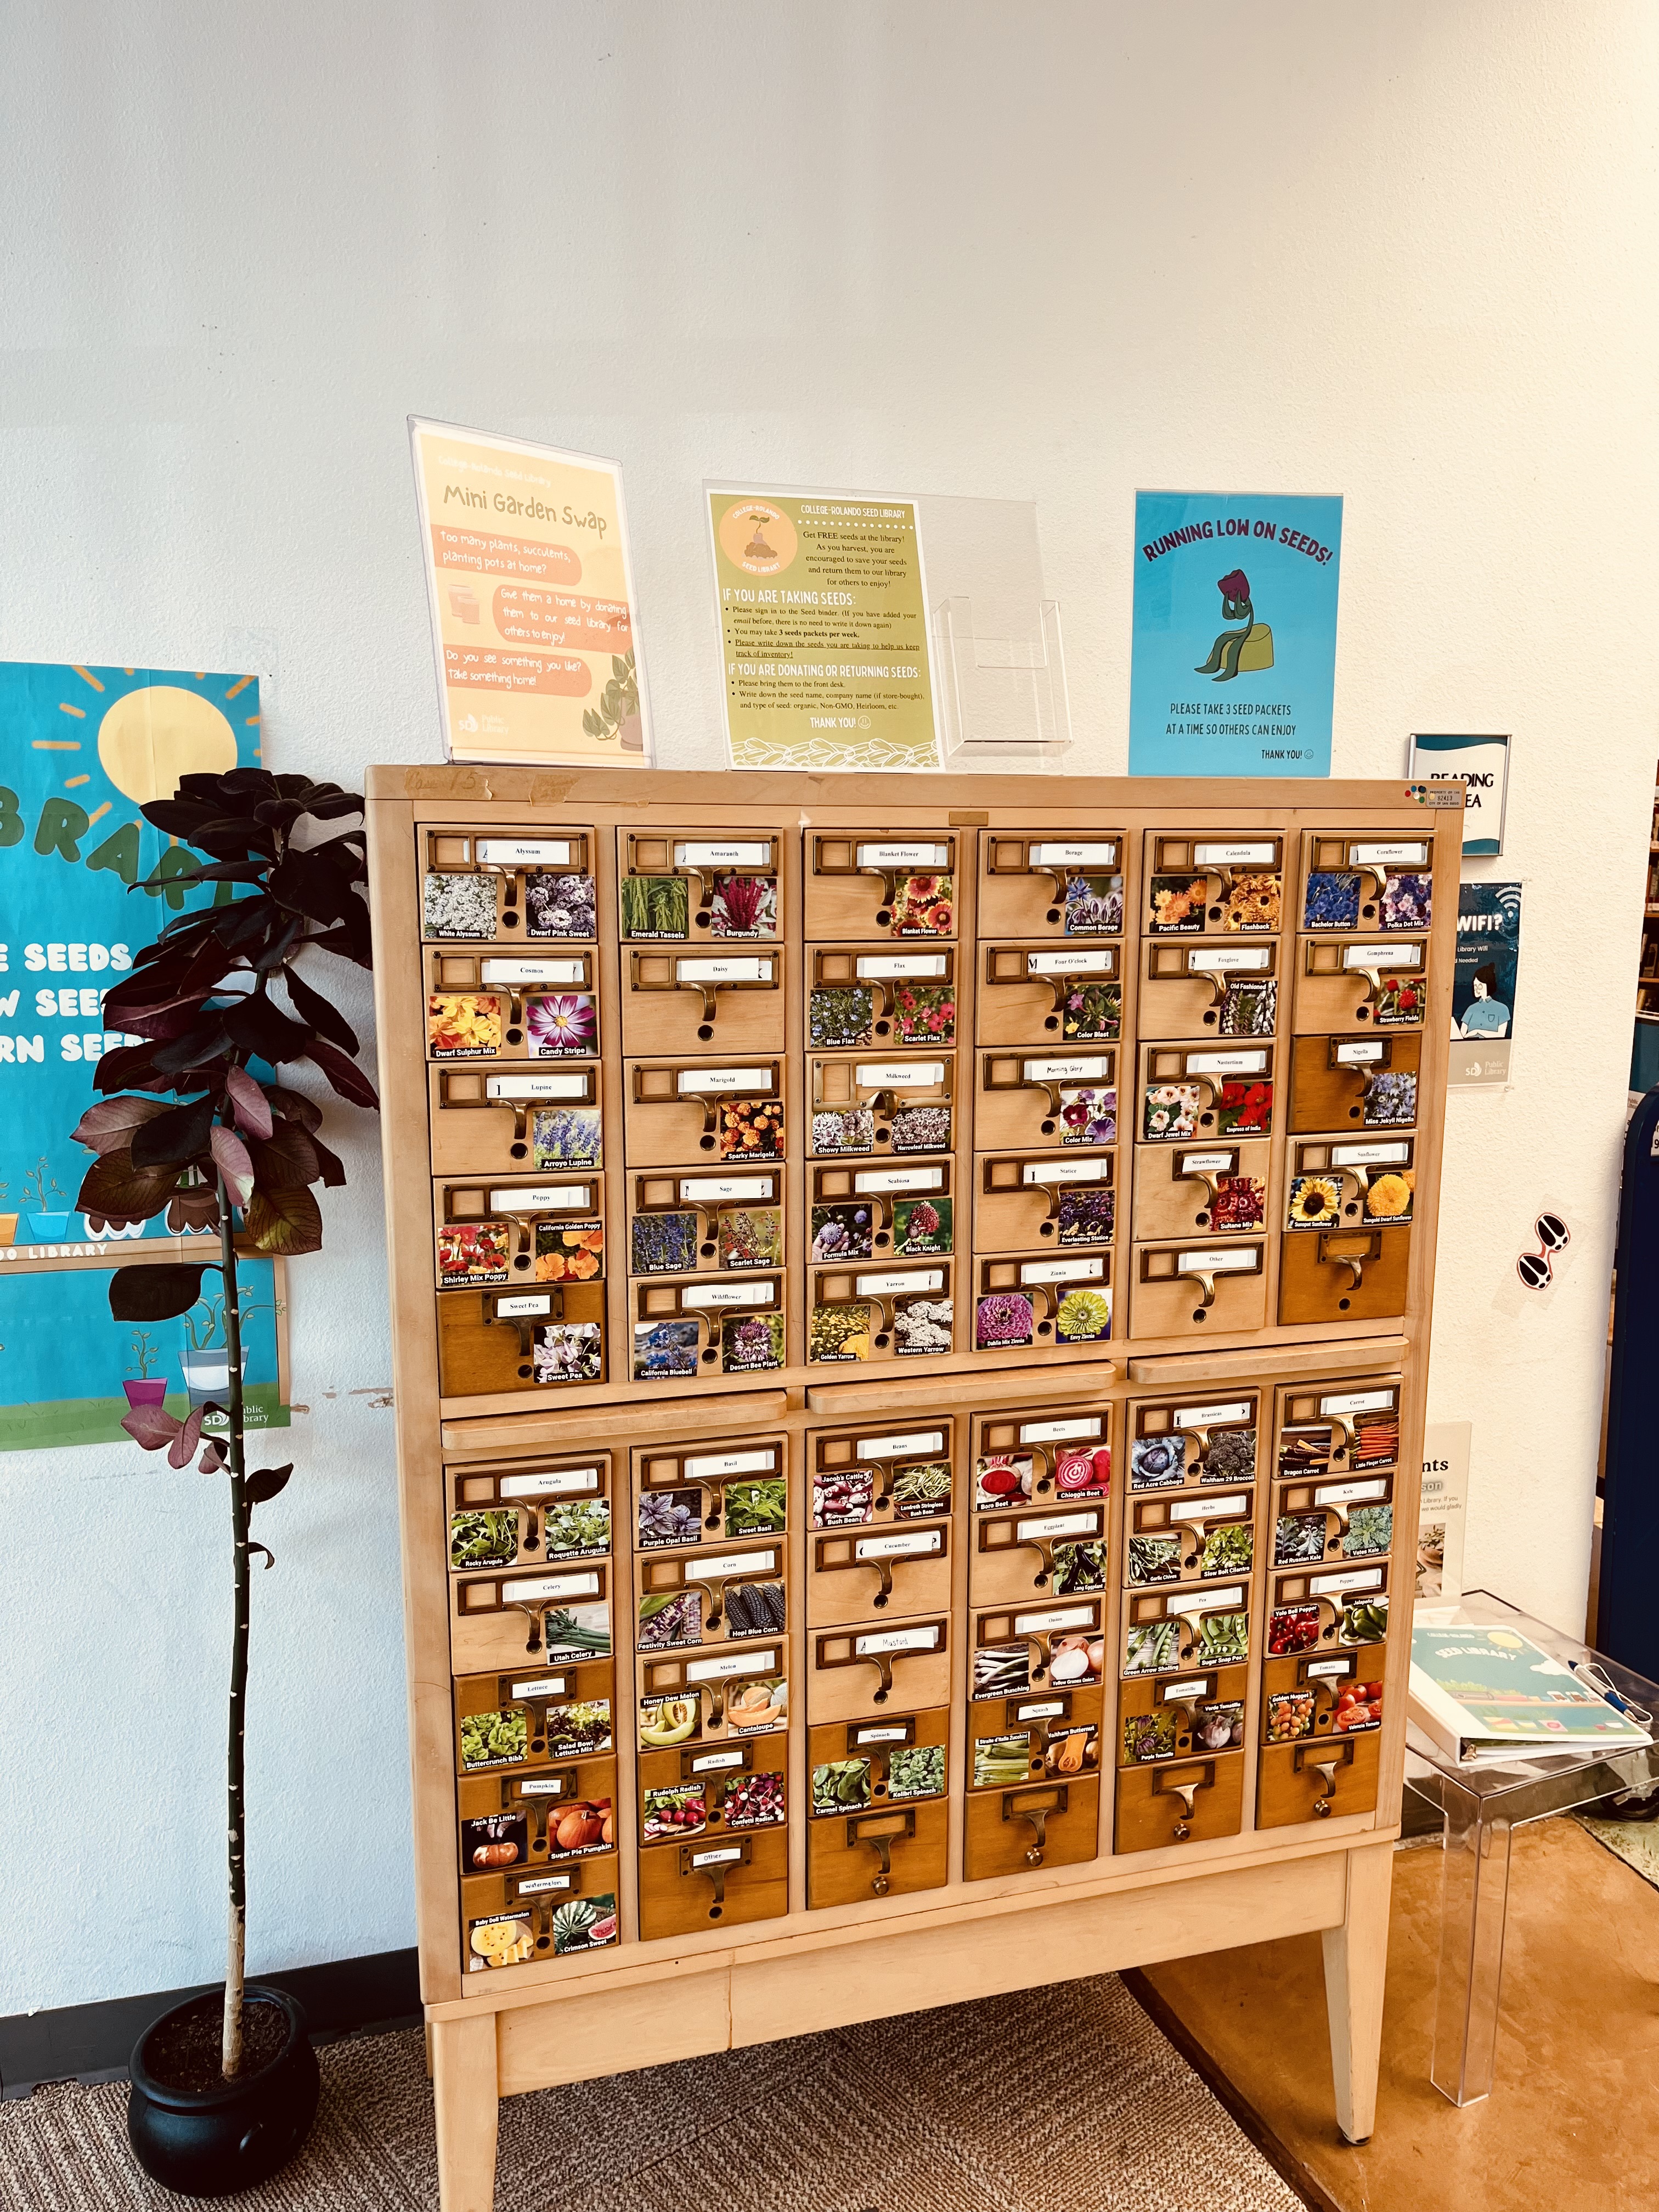 Seed library at College-Rolando Library